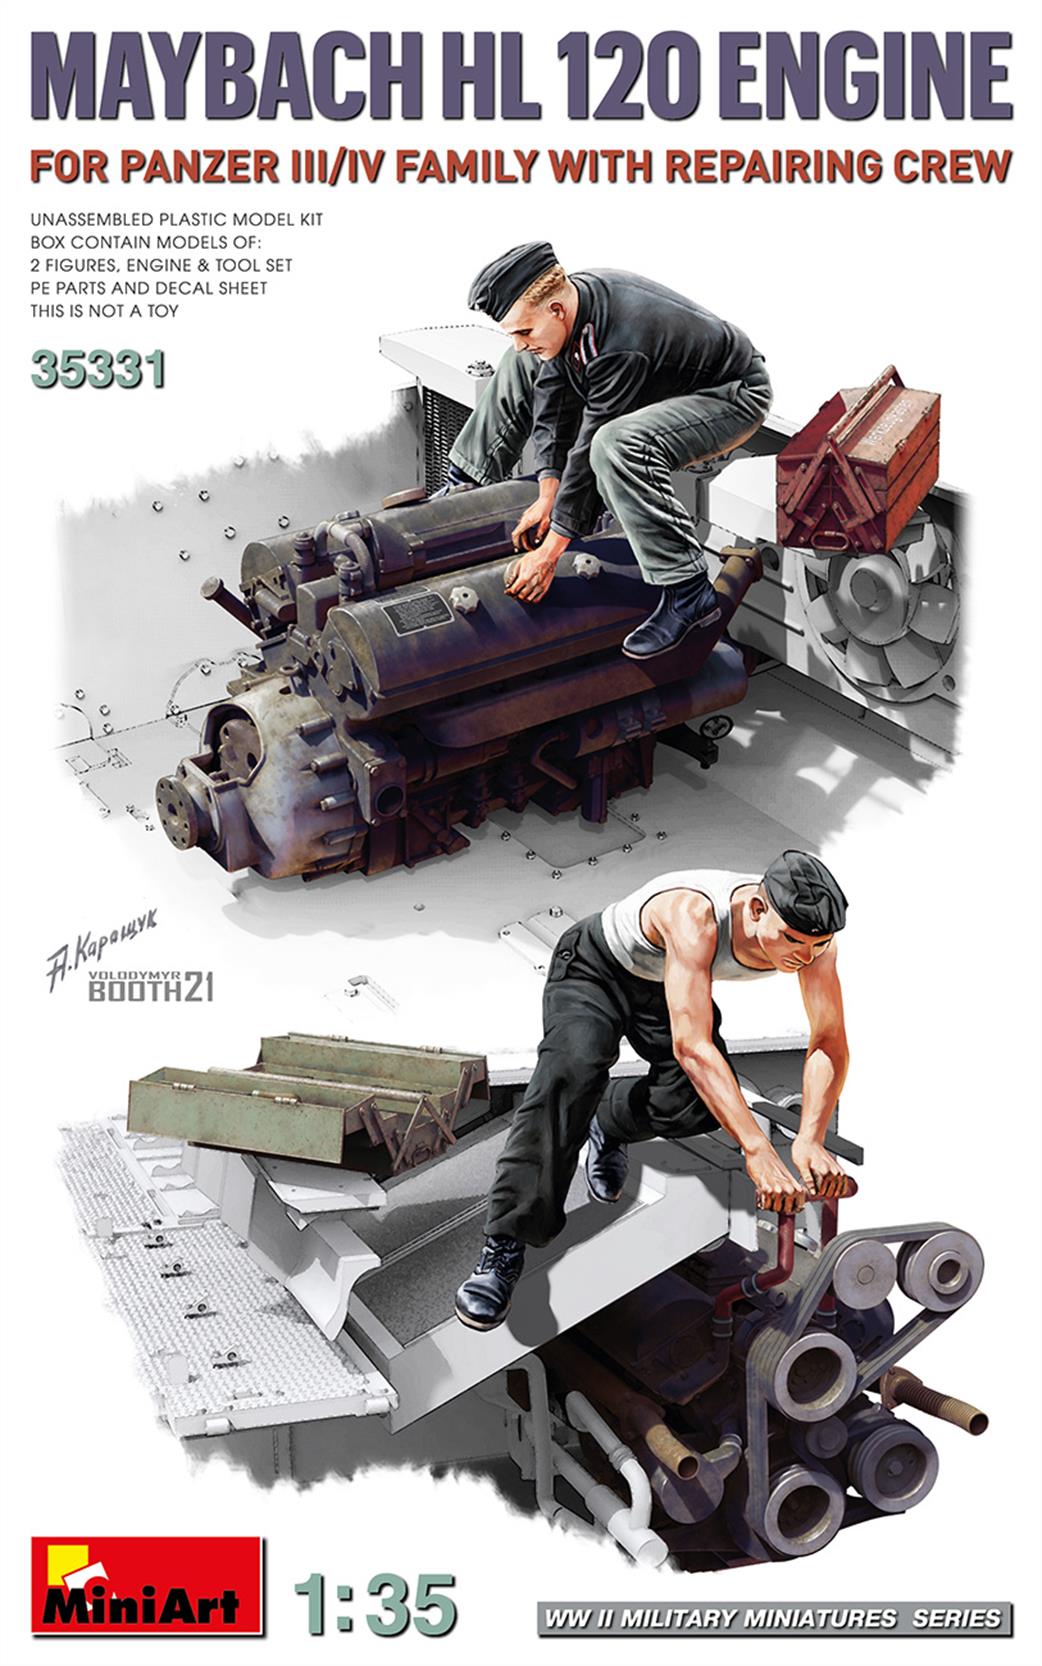 MiniArt 1/35 35331 Maybach HL-120 Engine With Repair Crew